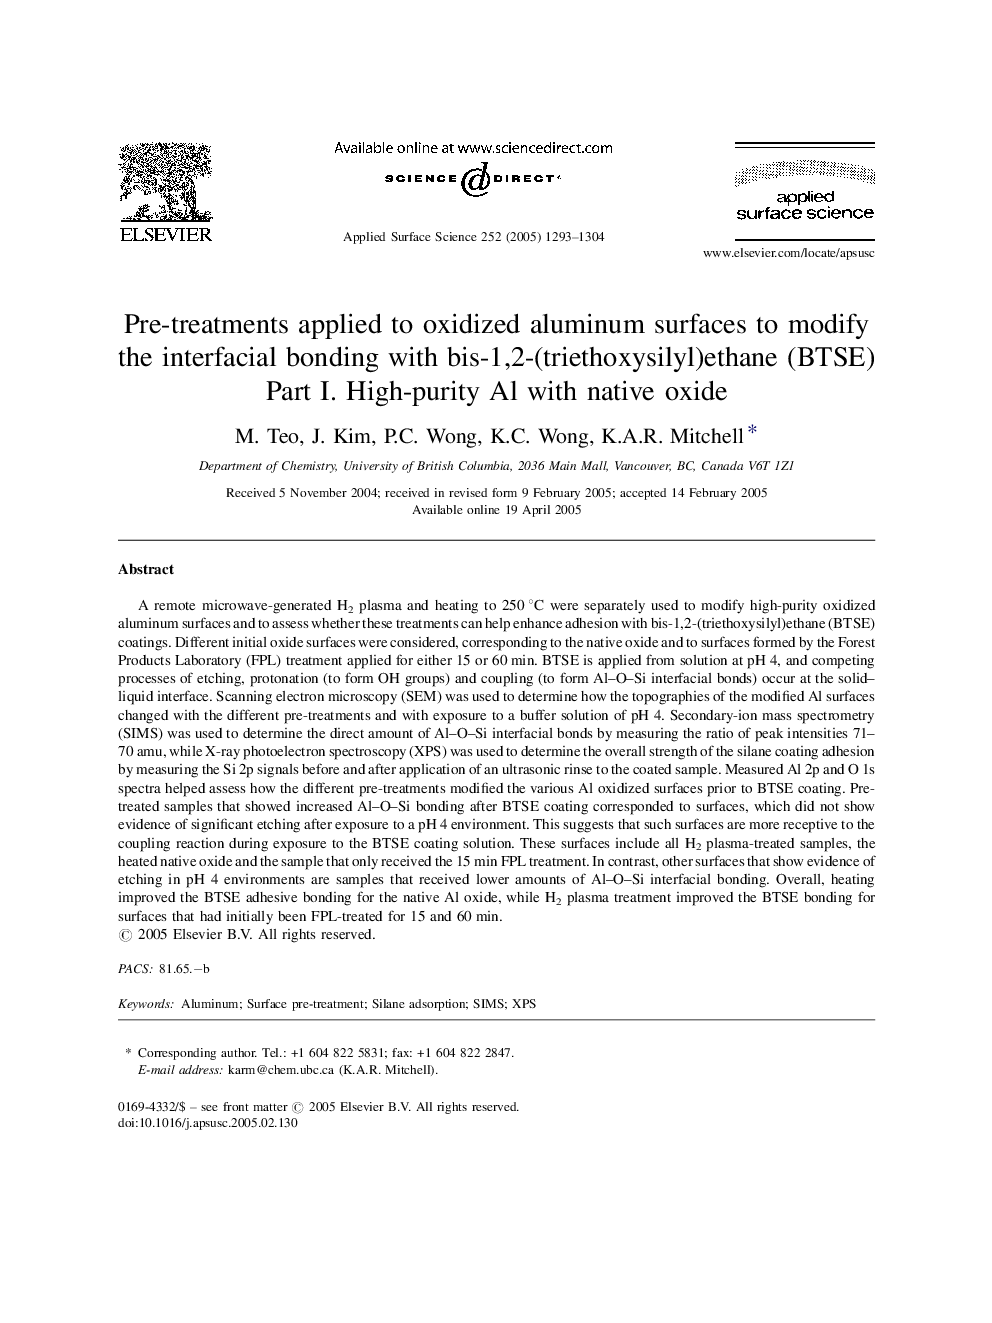 Pre-treatments applied to oxidized aluminum surfaces to modify the interfacial bonding with bis-1,2-(triethoxysilyl)ethane (BTSE): Part I. High-purity Al with native oxide